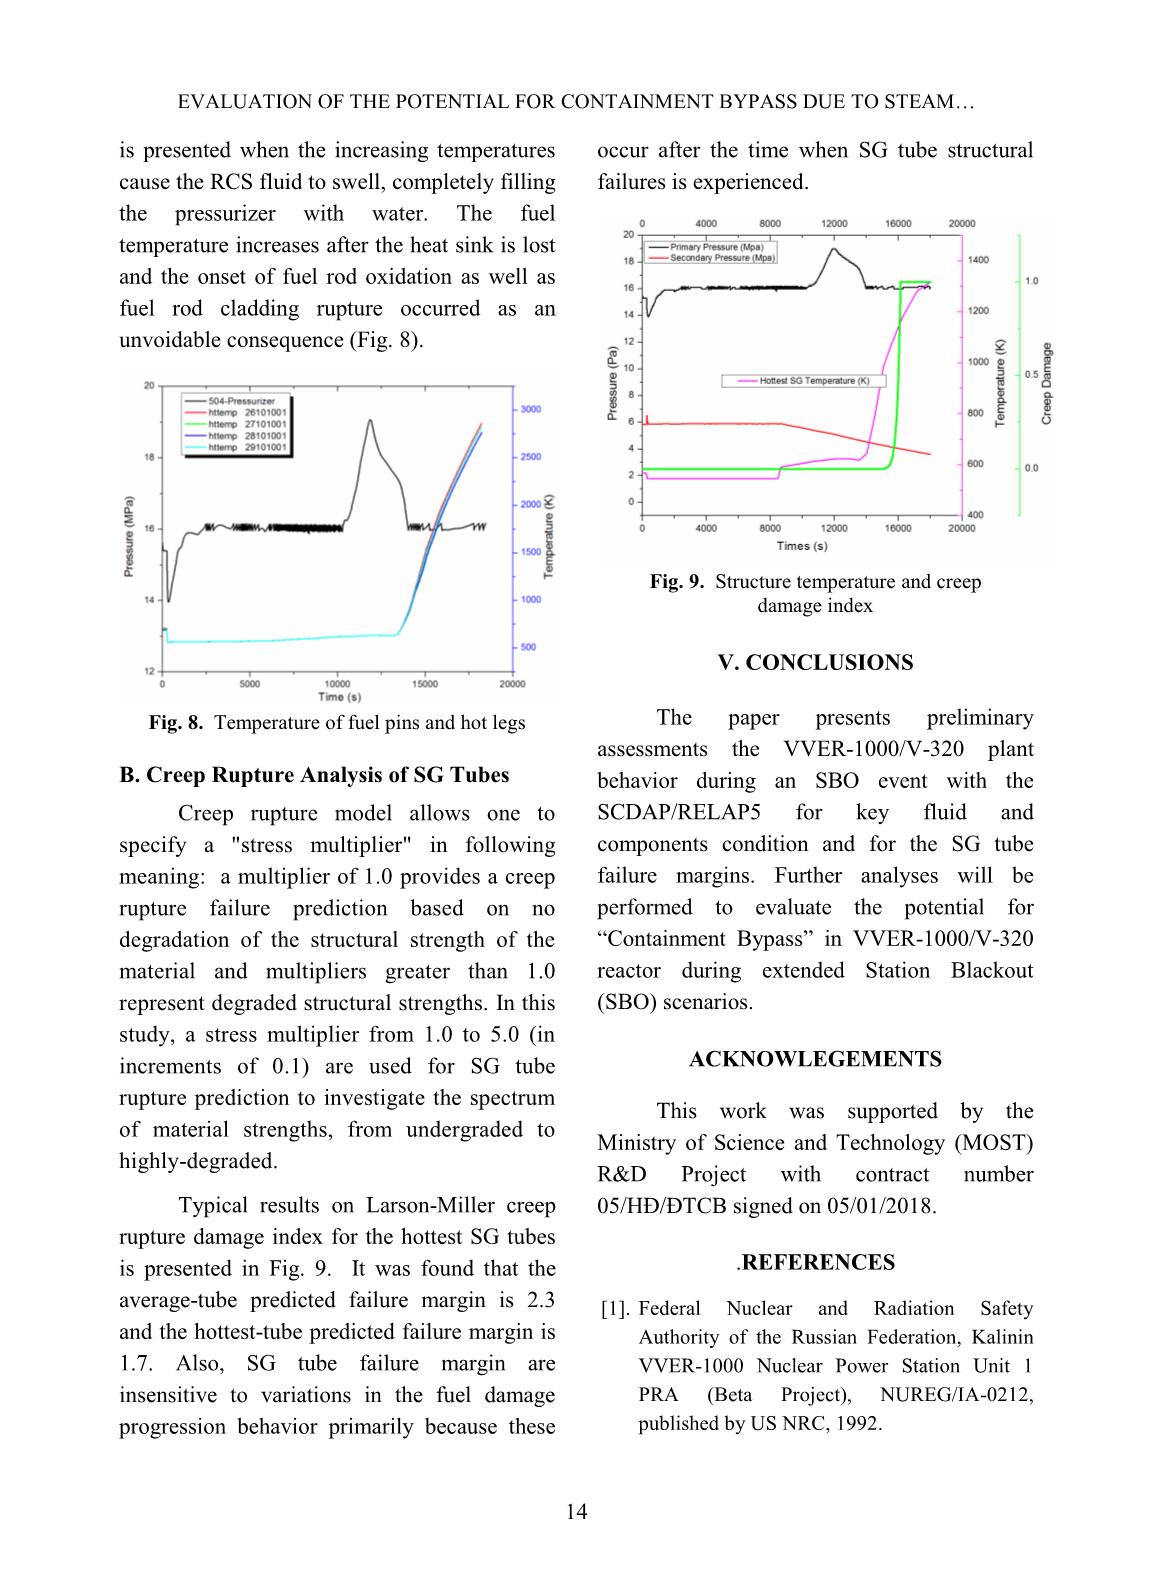 Evaluation of the Potential for Containment Bypass due to Steam Generator Tube Rupture in VVER-1000/V320 Reactor during Extended SBO sequence using SCDAP/RELAP5 code trang 6